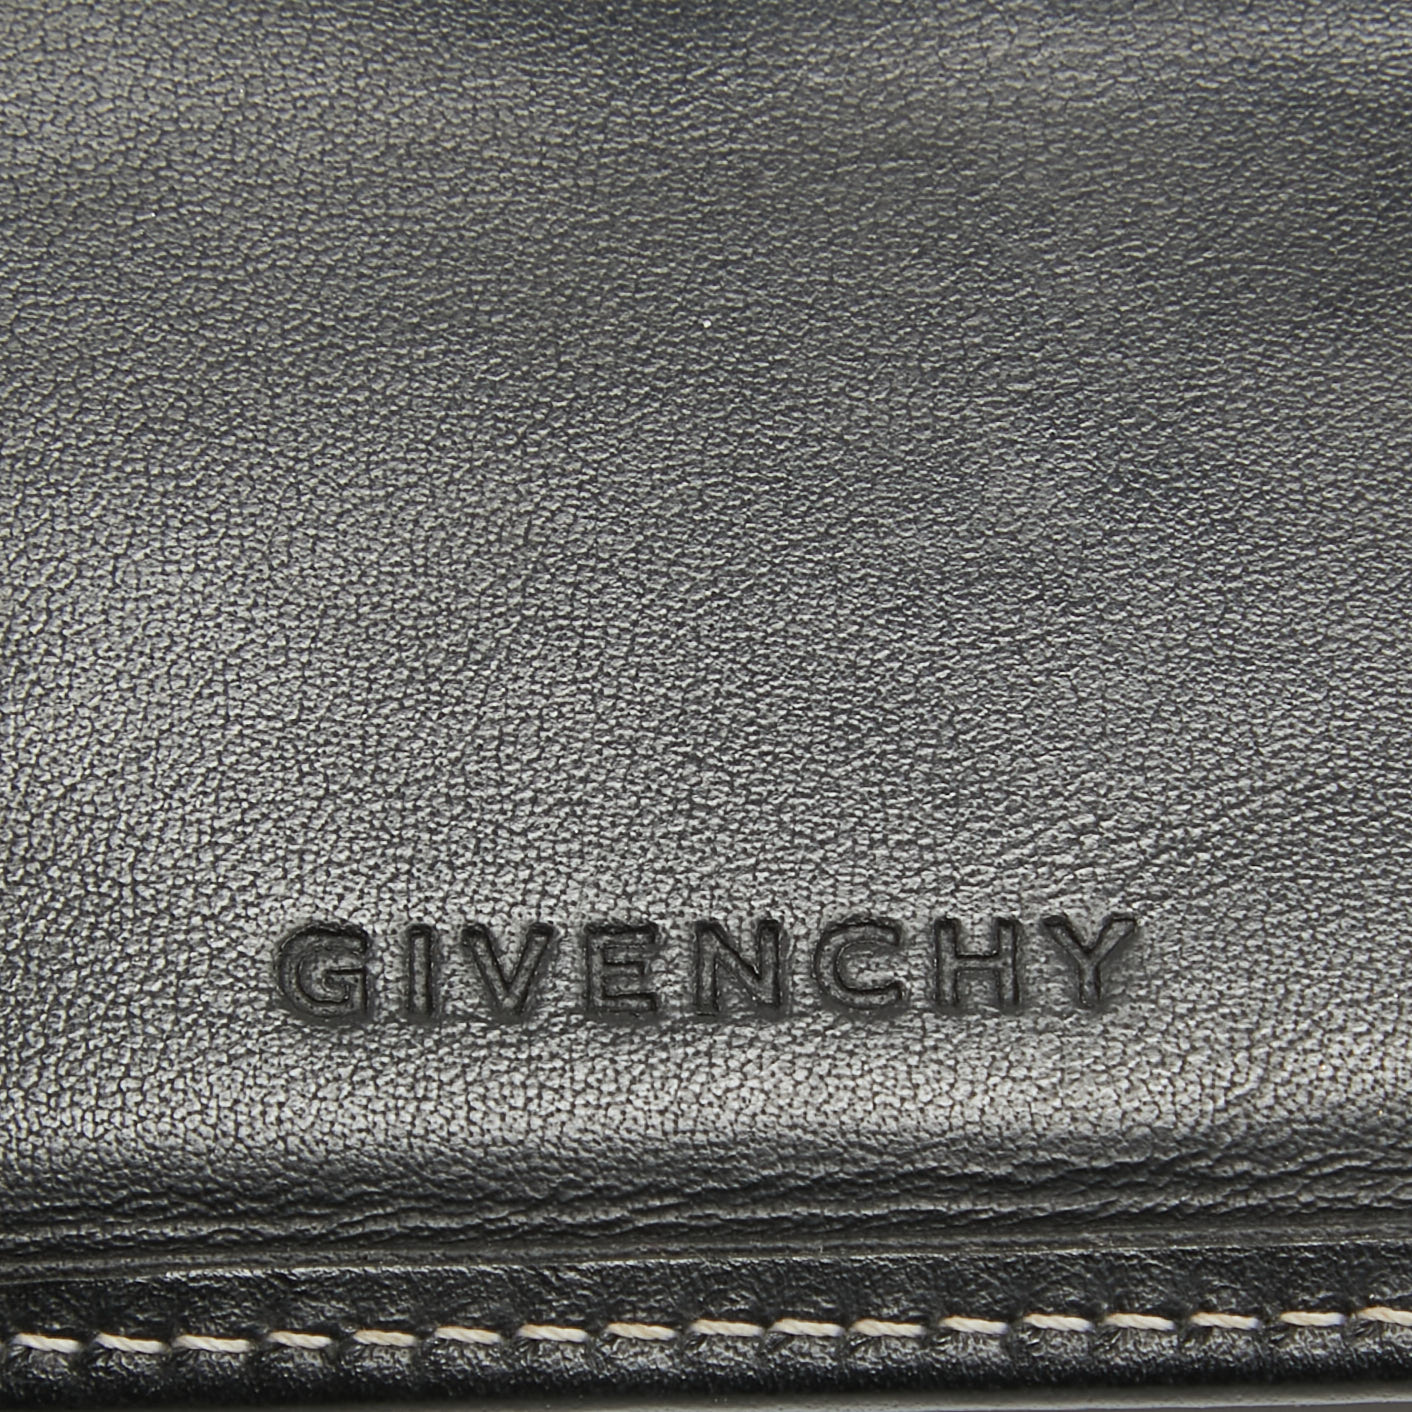 Givenchy Black/Grey Monogram Canvas And Leather Bifold Compact Wallet